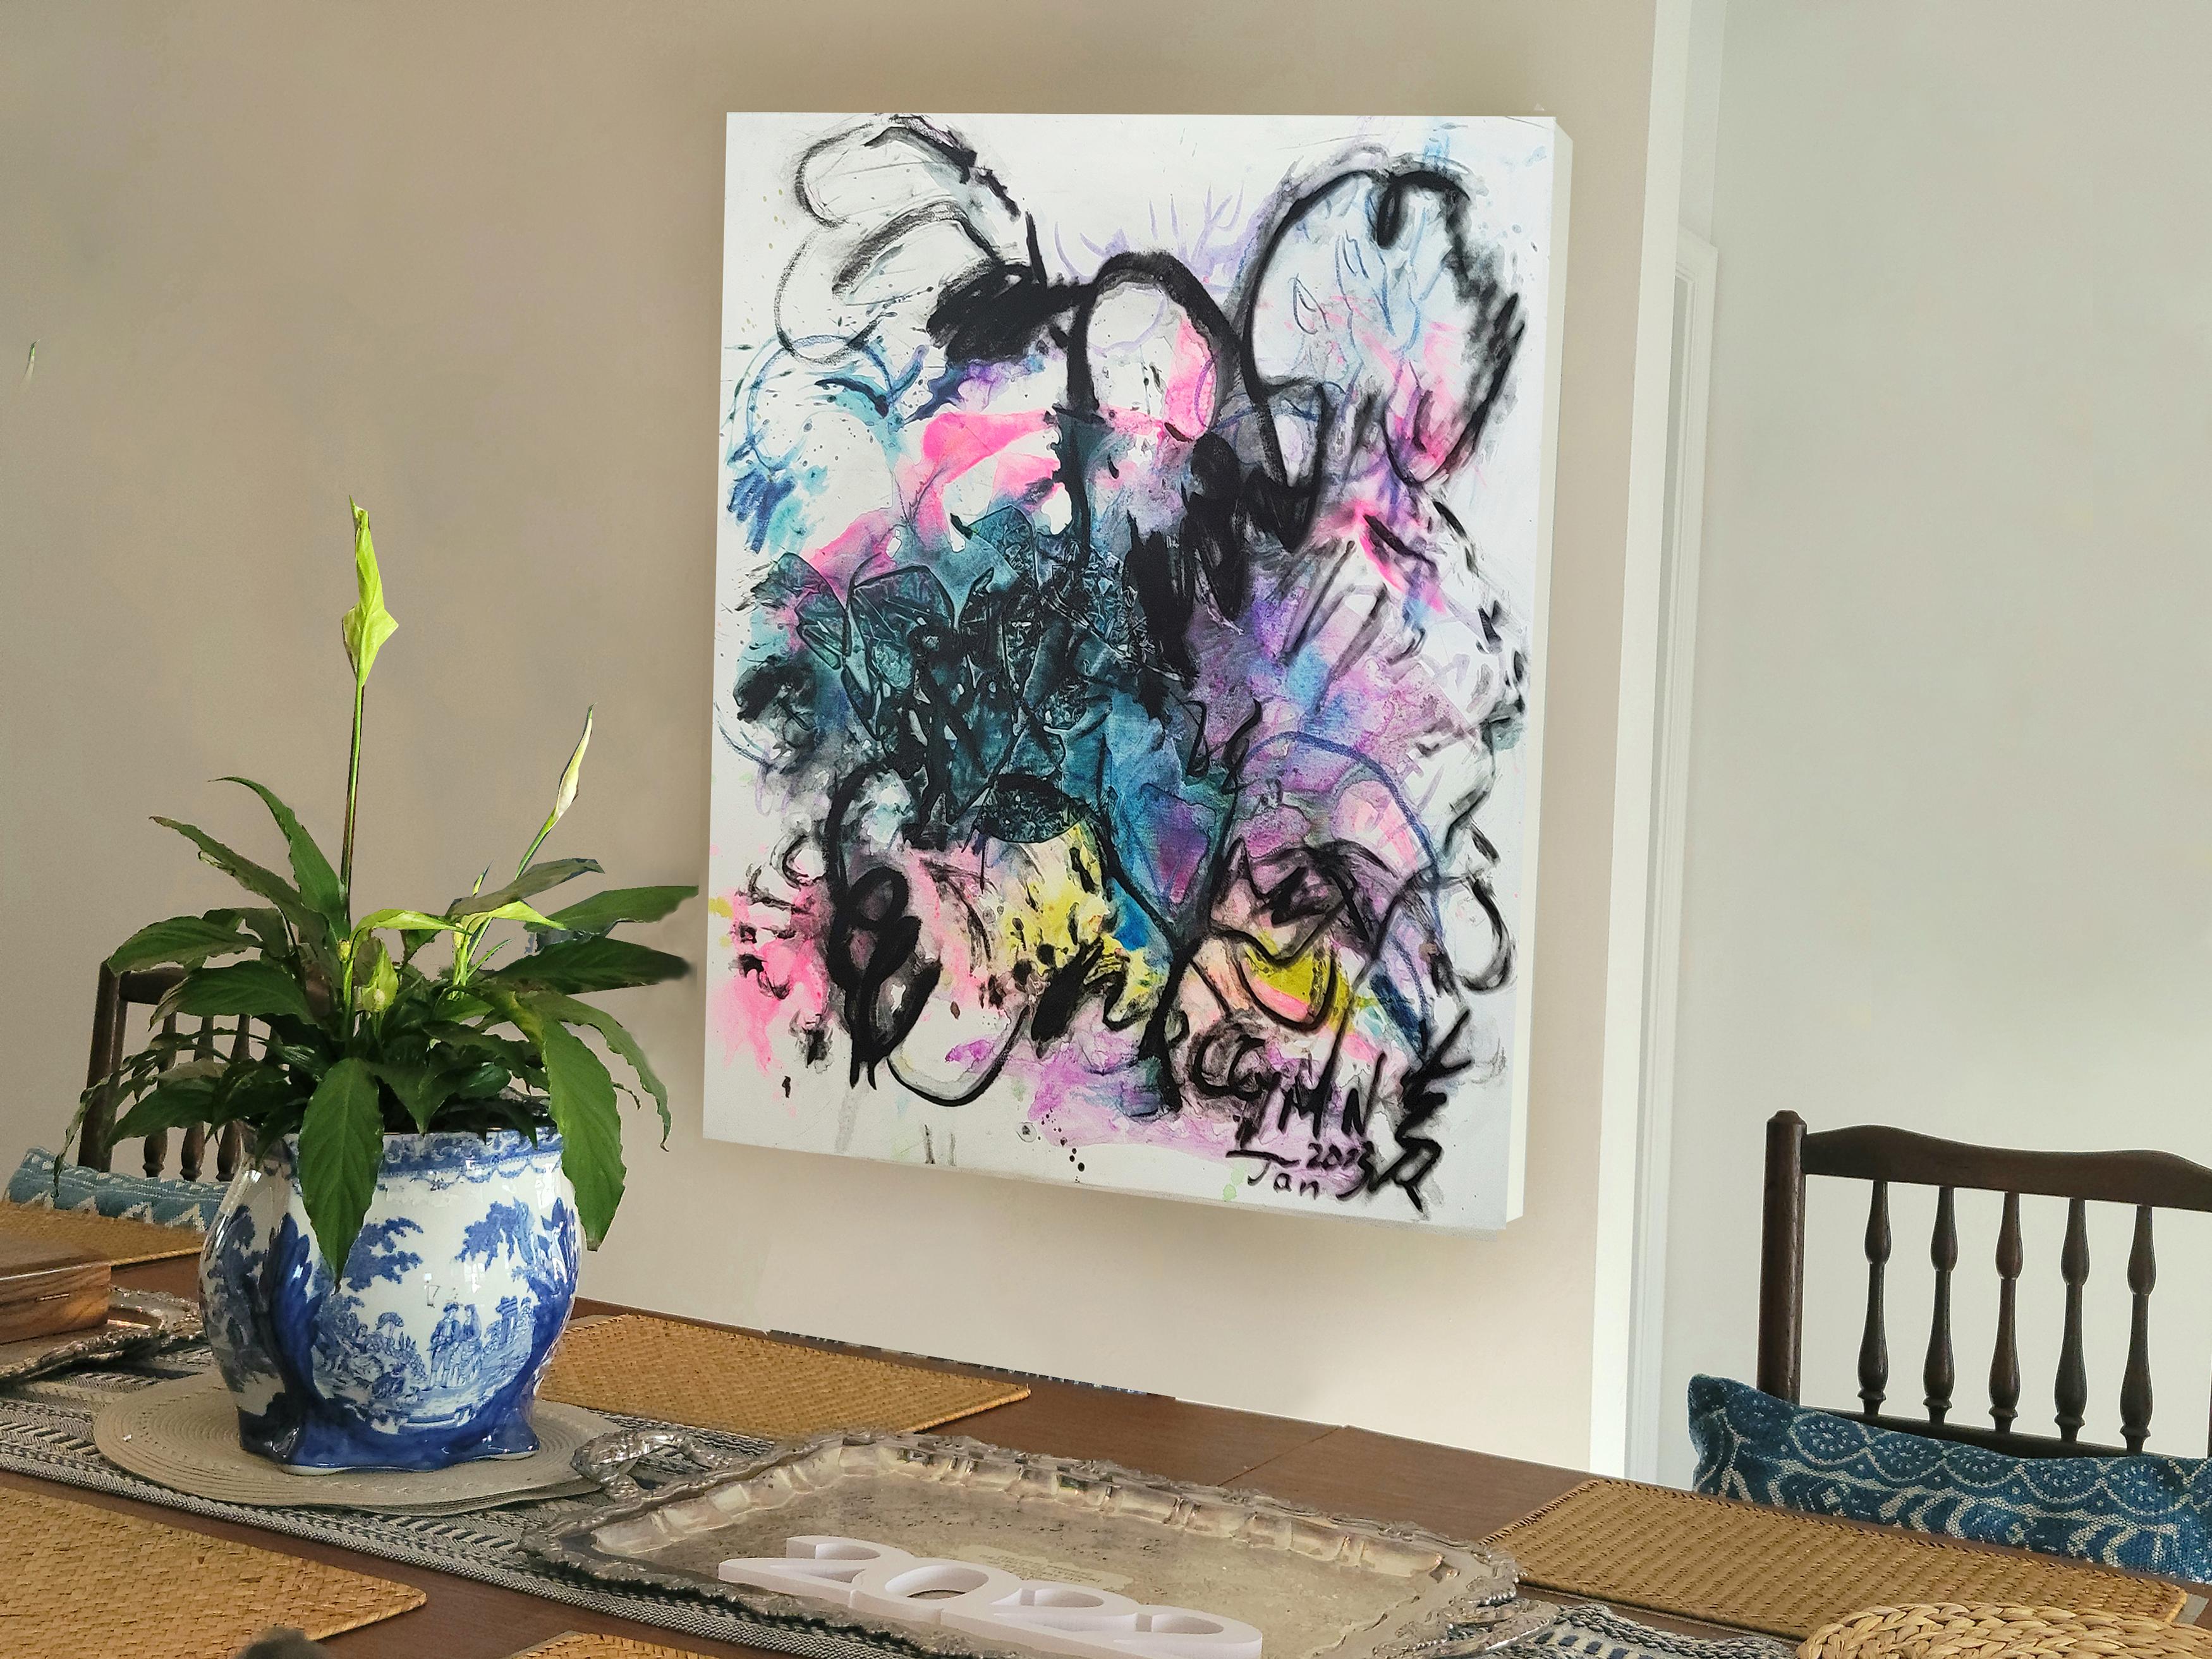 A Singular Transformation II - Energetic, Expressive Abstract, Zen Calligraphy - Abstract Expressionist Painting by Cymn Wong 